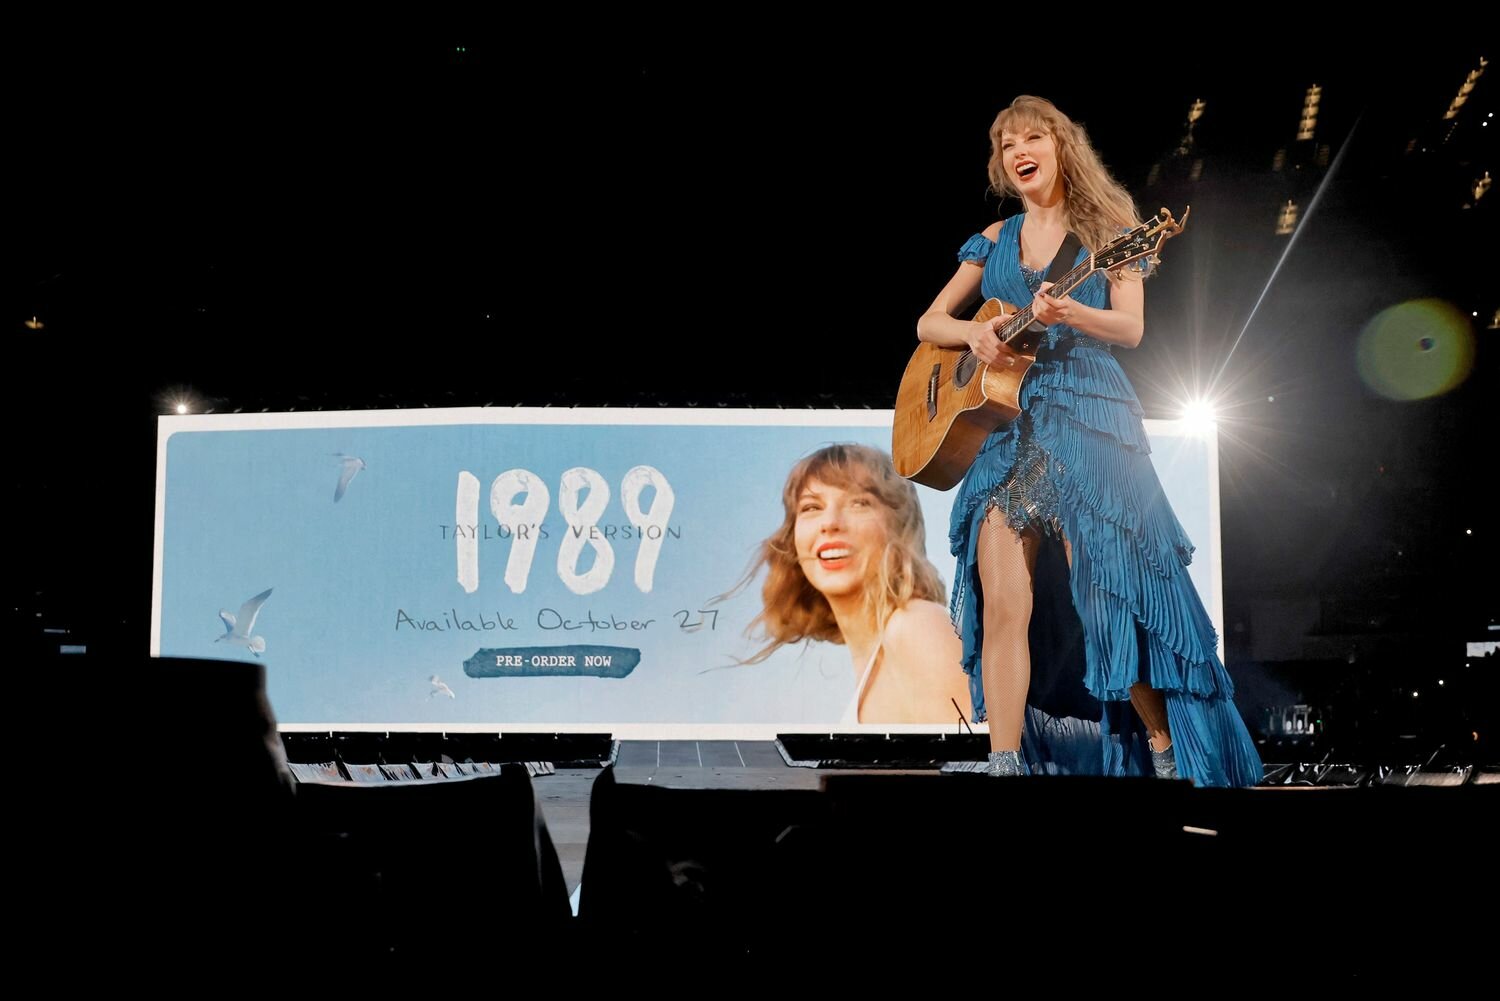 Taylor Swift performs onstage during "Taylor Swift | The Eras Tour" in a blue dress